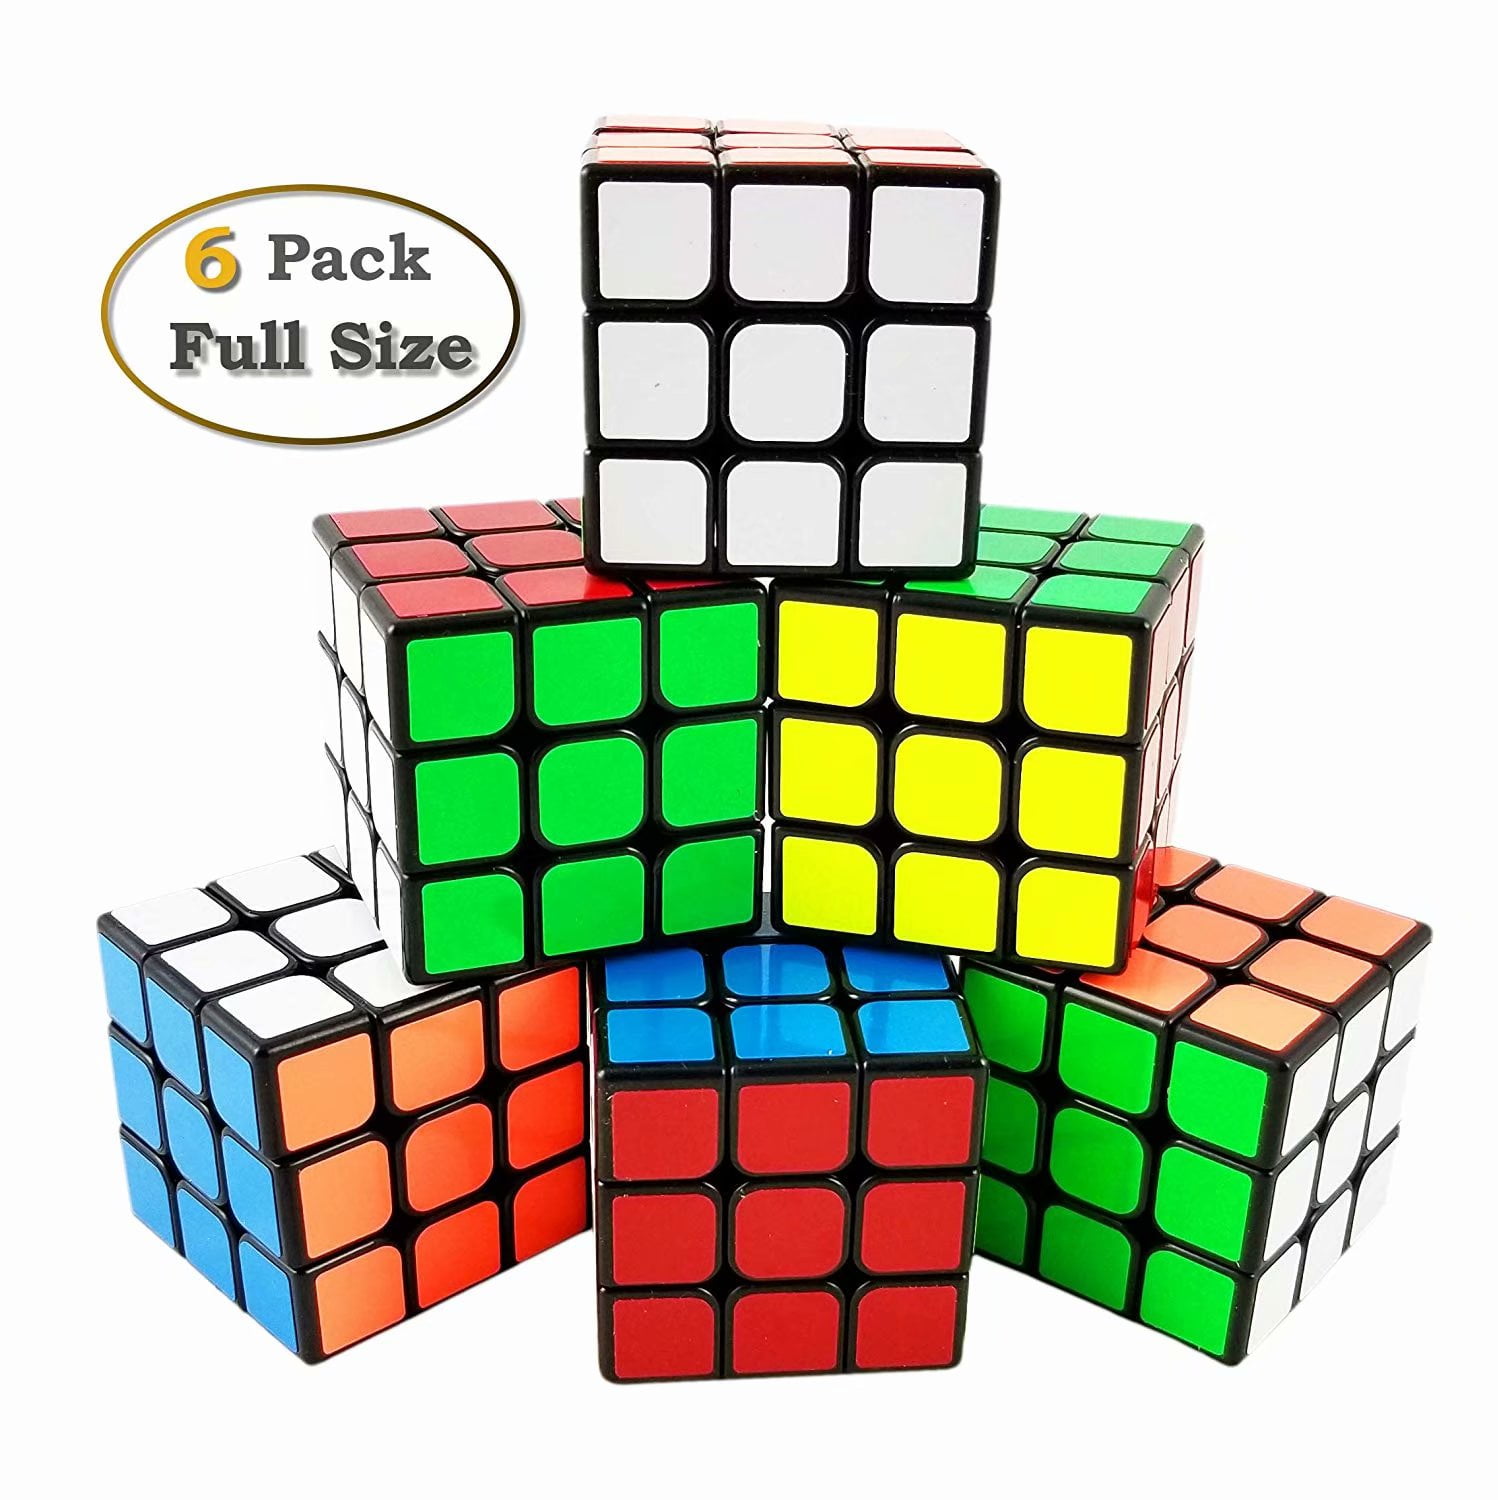 ShengShou Tank Frosted 4x4x4 Magic Cube Speed Puzzle Cube For Children Adults 